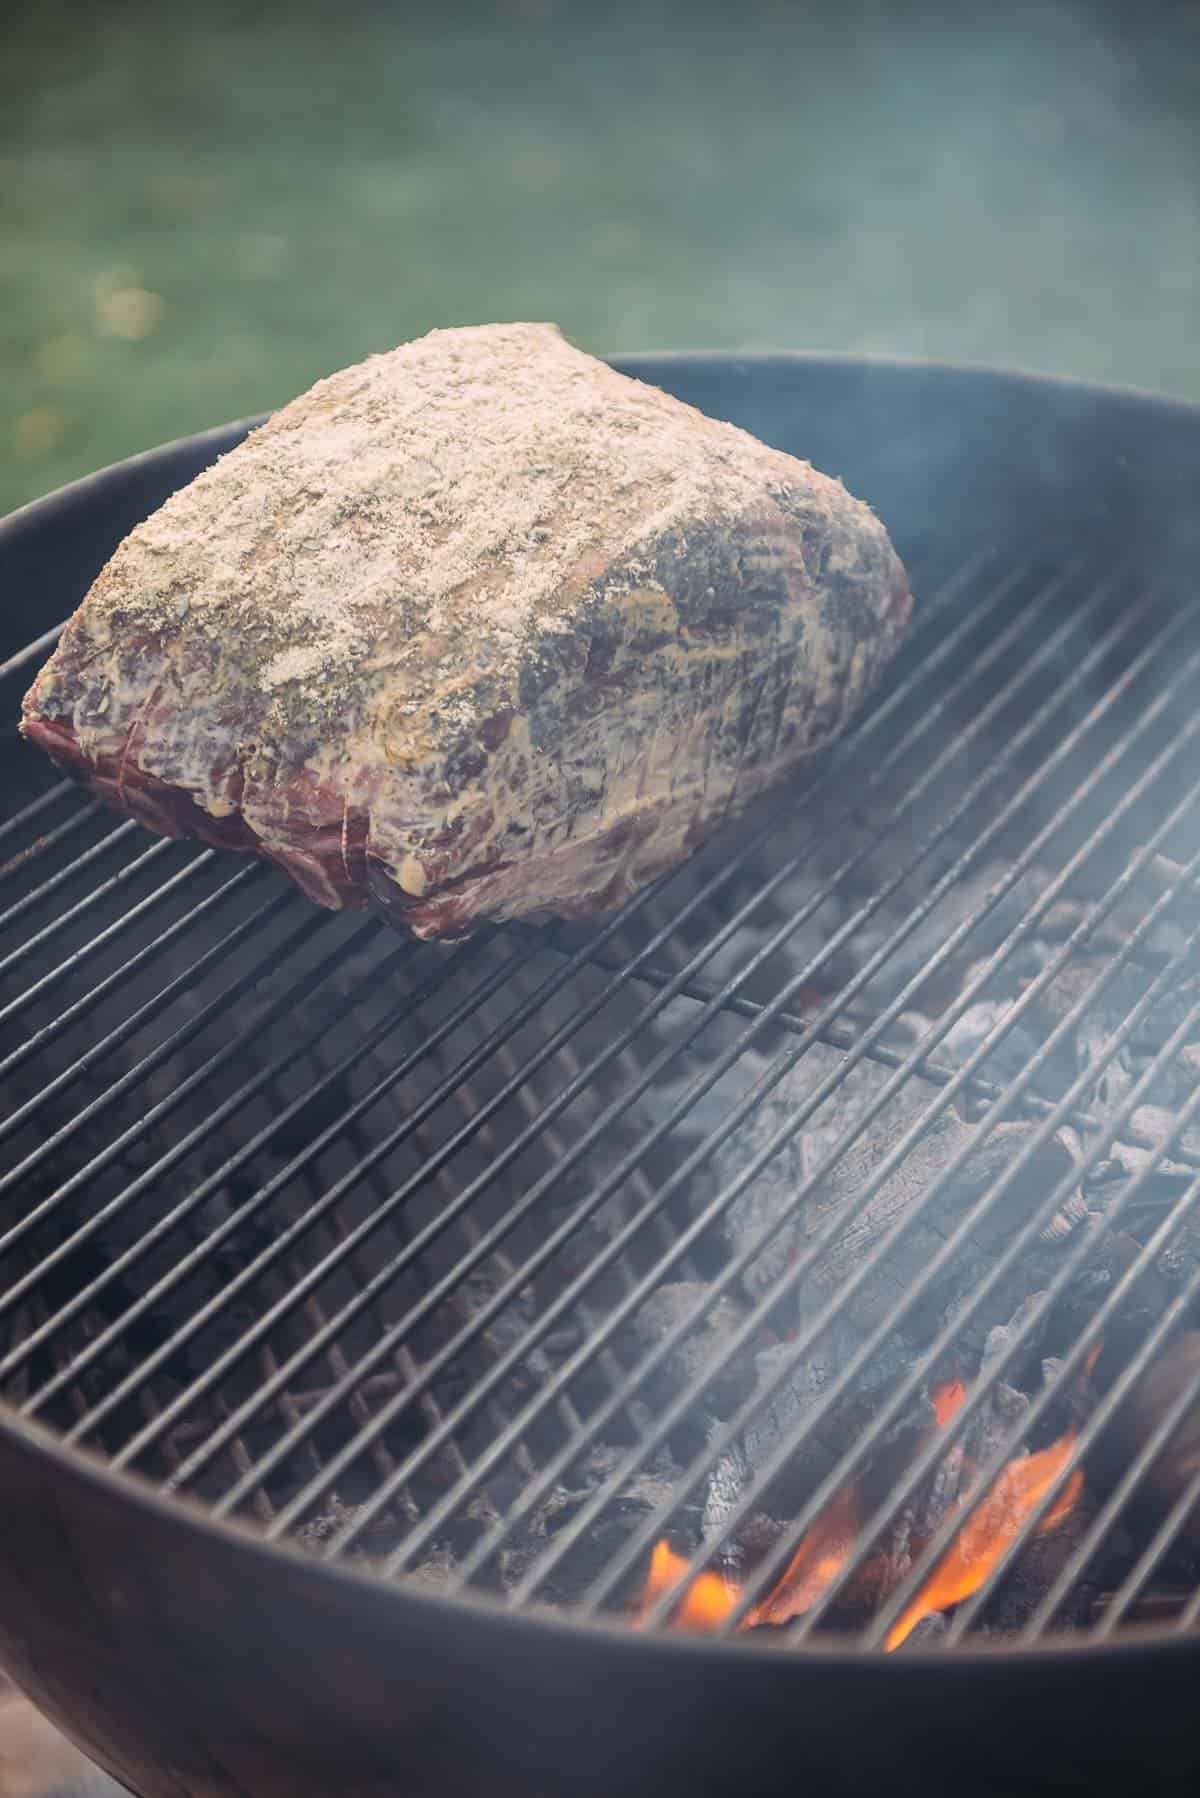 A standing rib roast is being cooked on a grill over indirect heat. 